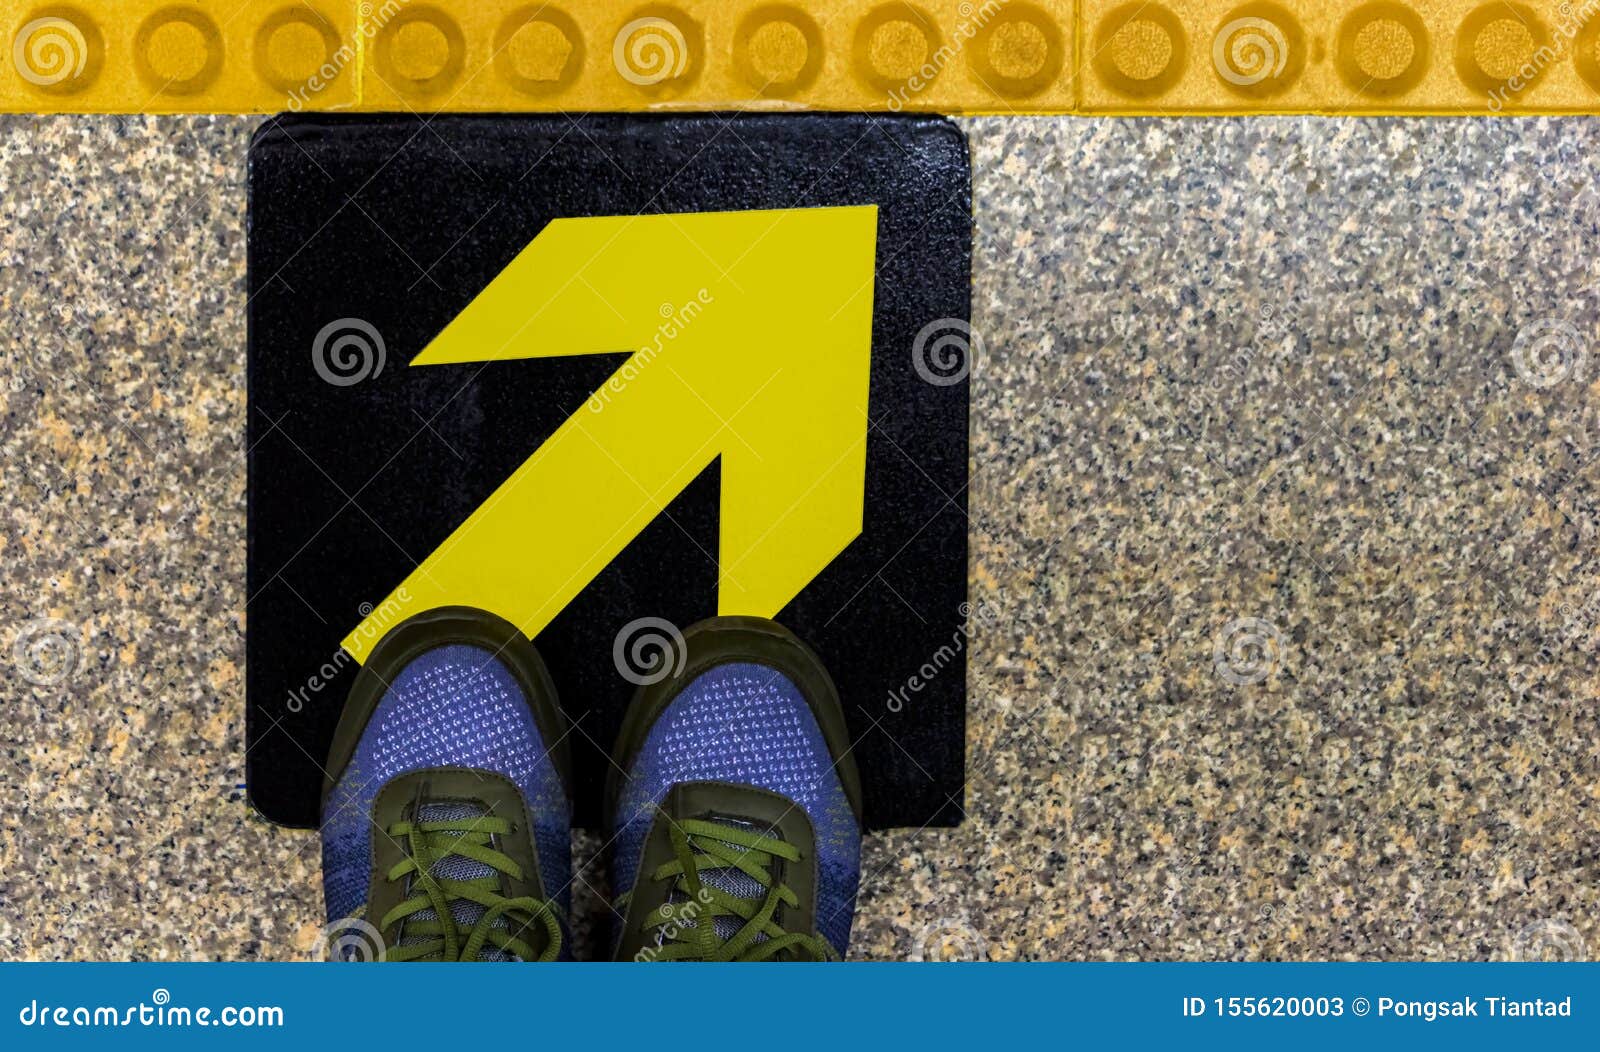 men`s shoes on a yellow guidepost on a concrete floor. the concept of a decision made in accordance with our guidelines